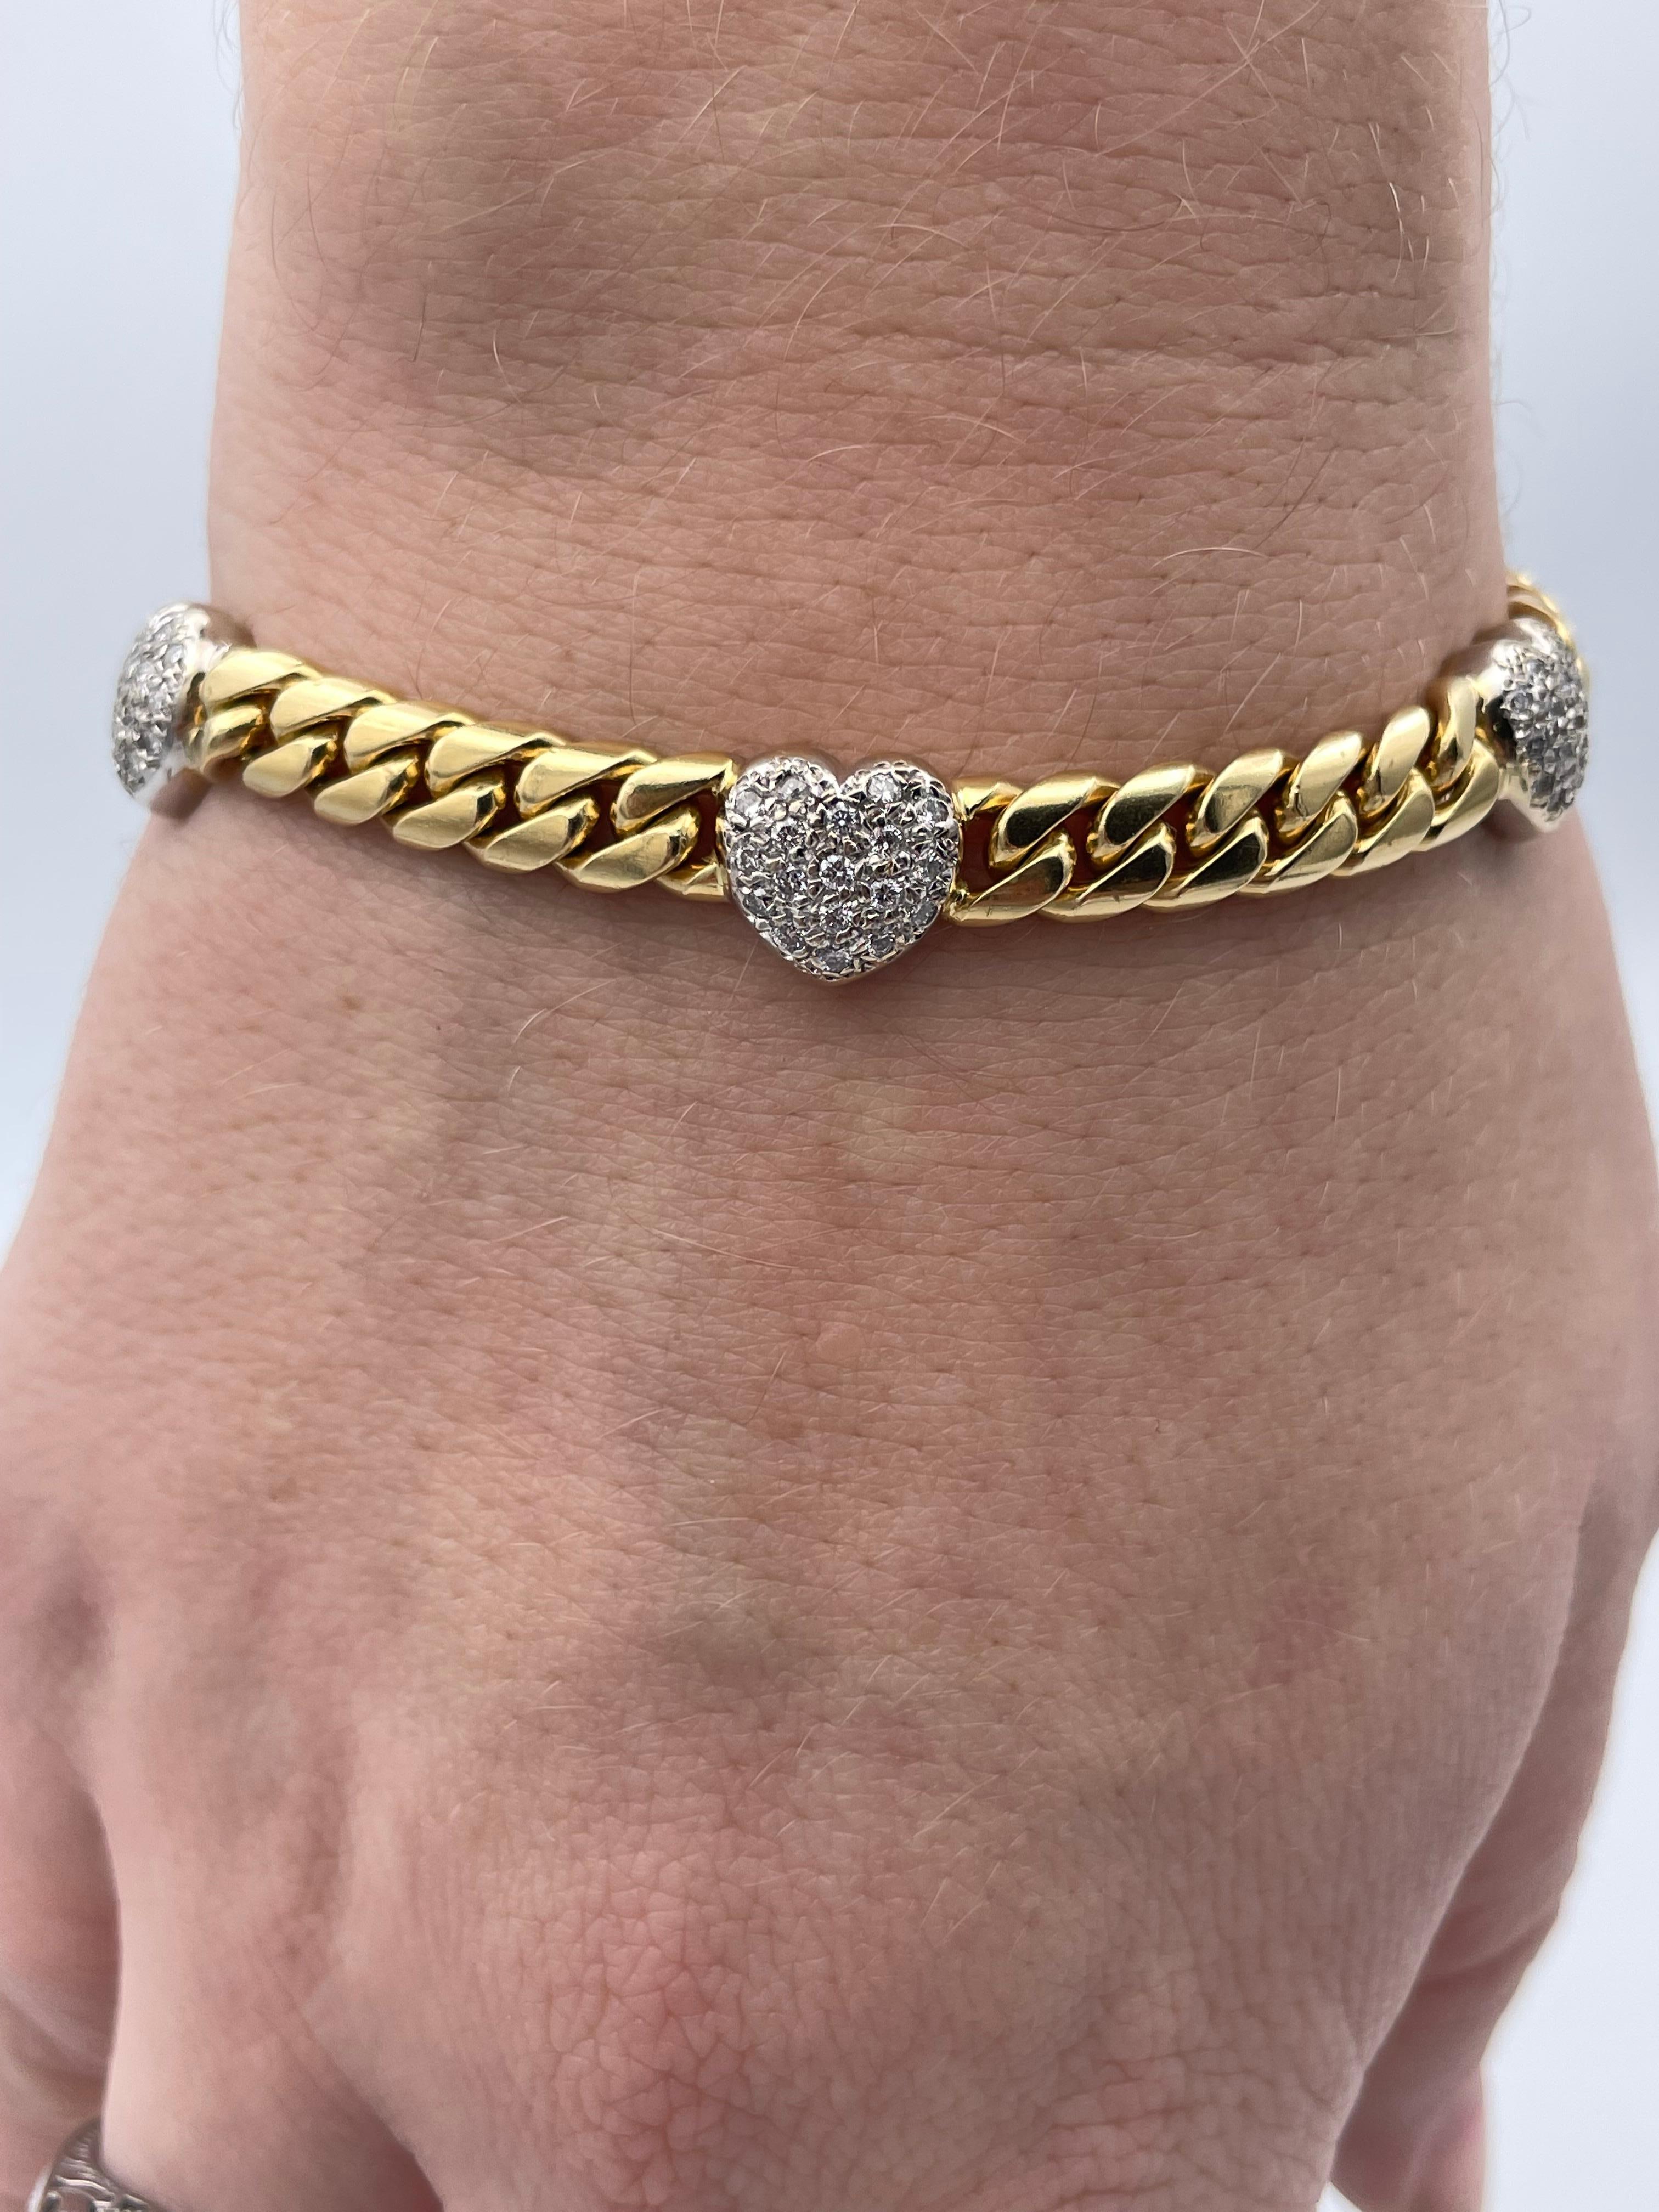 Diamond Heart Chain Gold Bracelet In Excellent Condition For Sale In New York, NY